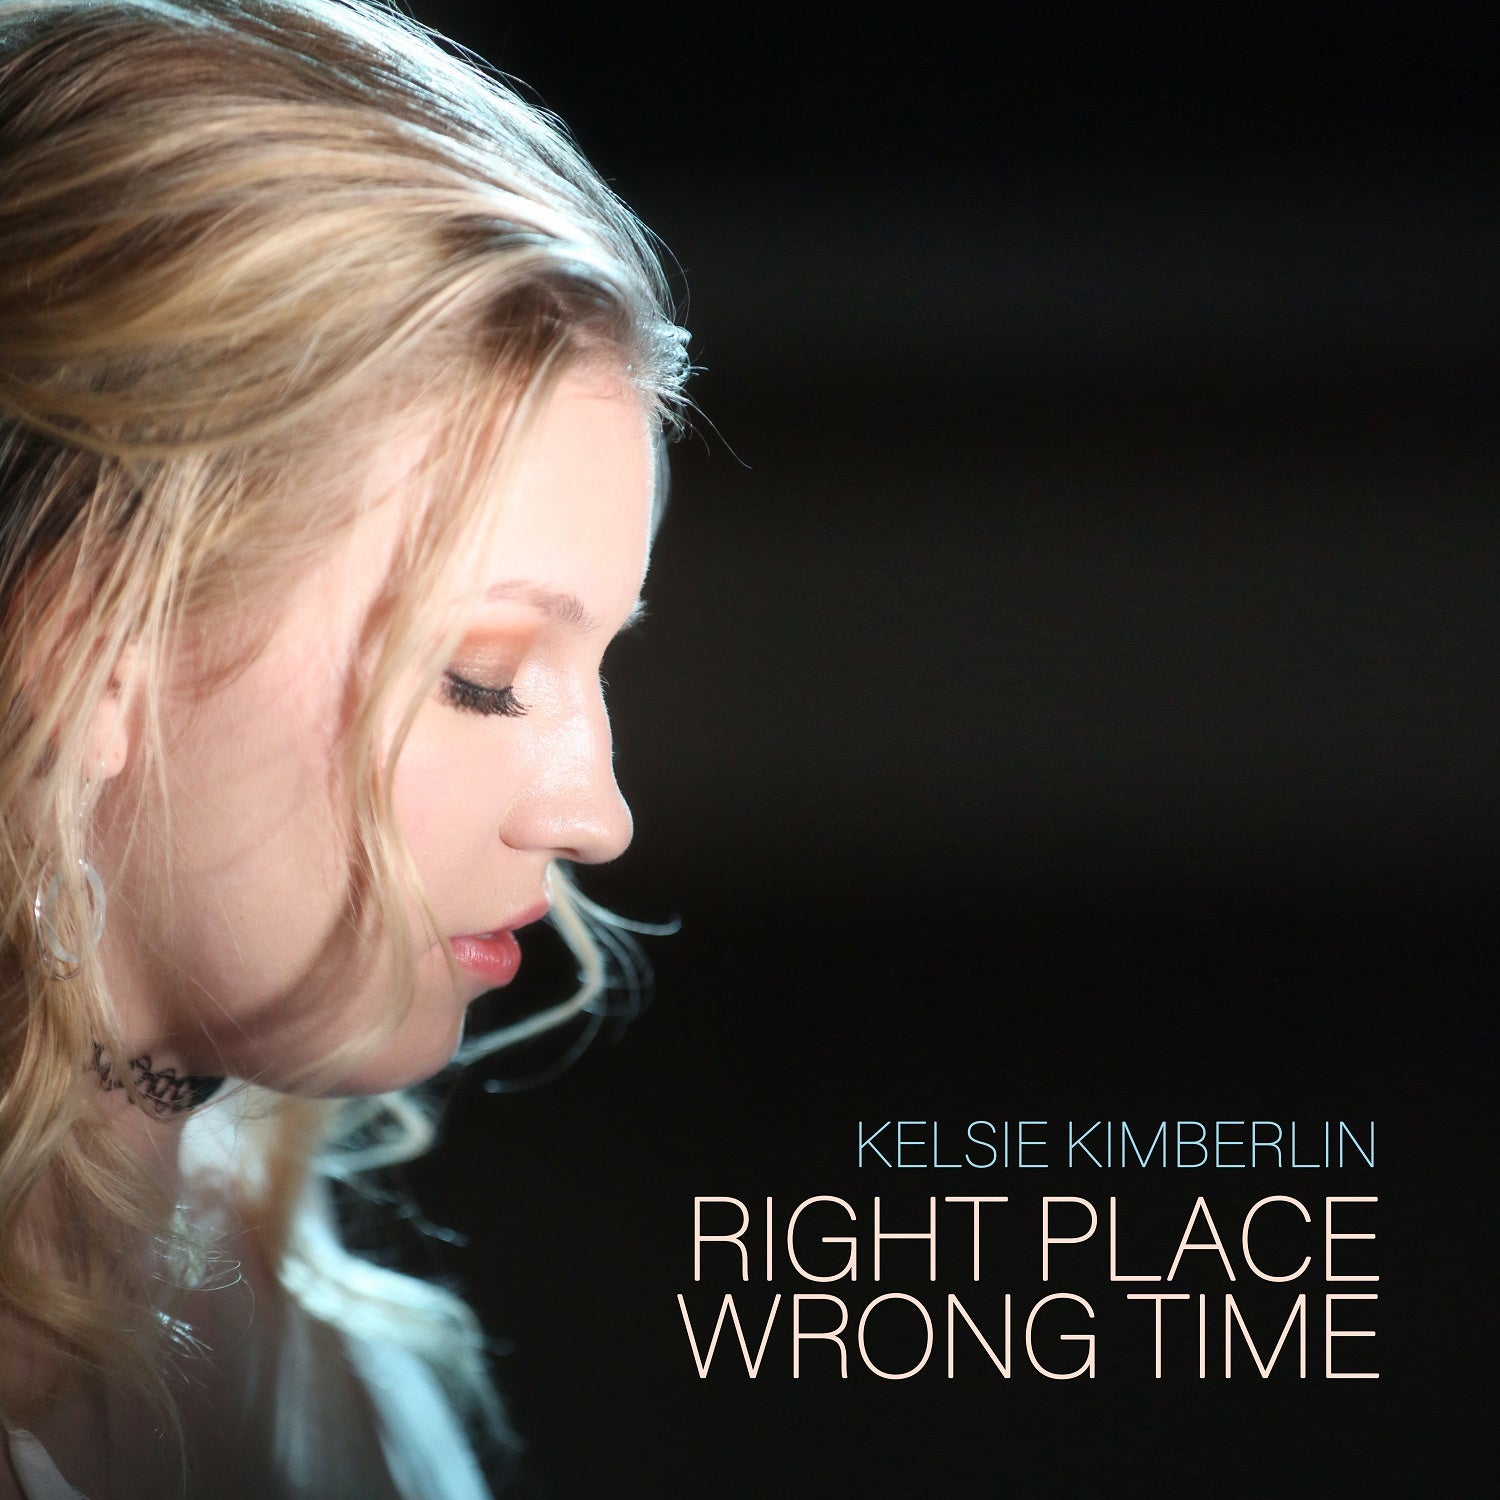 Kelsie Kimberlin – ‘Right Place Wrong Time’